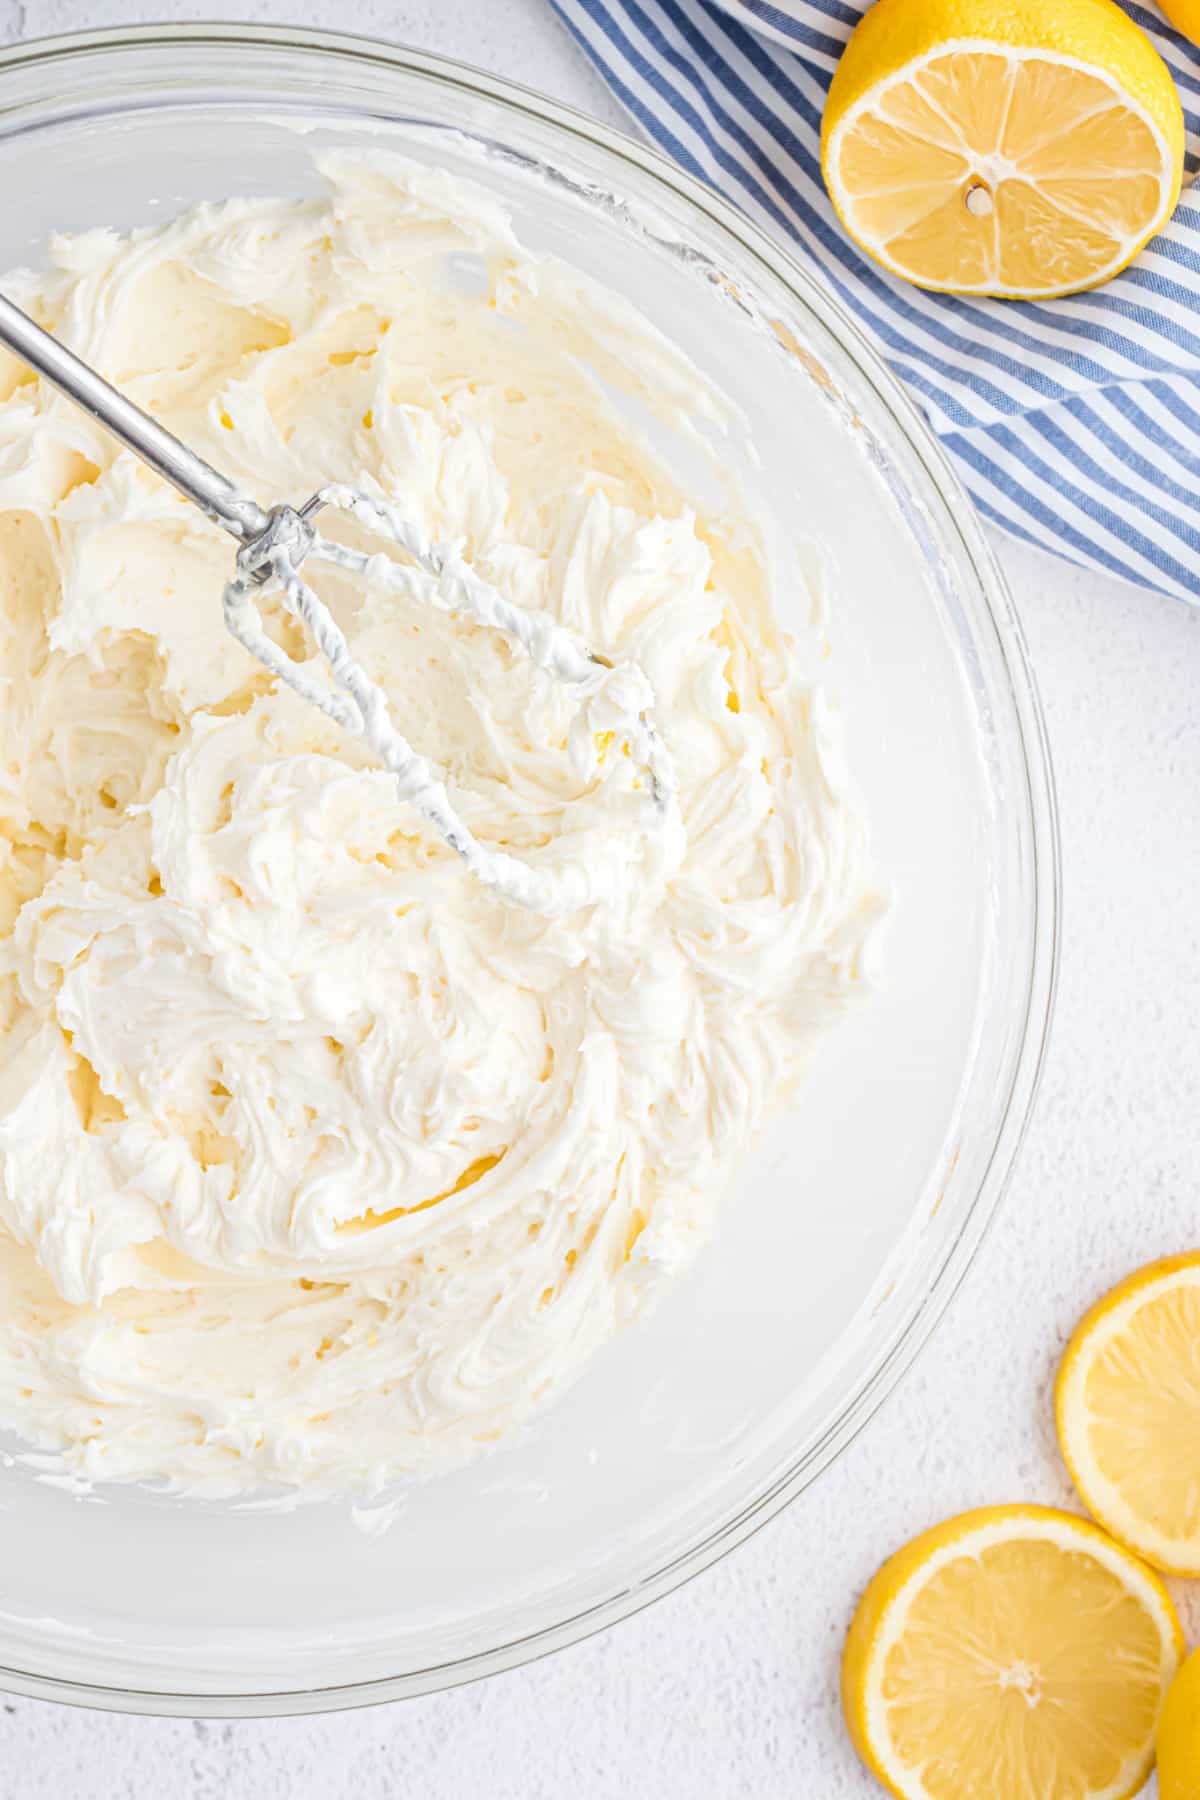 Lemon buttercream frosting whipped to a fluffy texture.